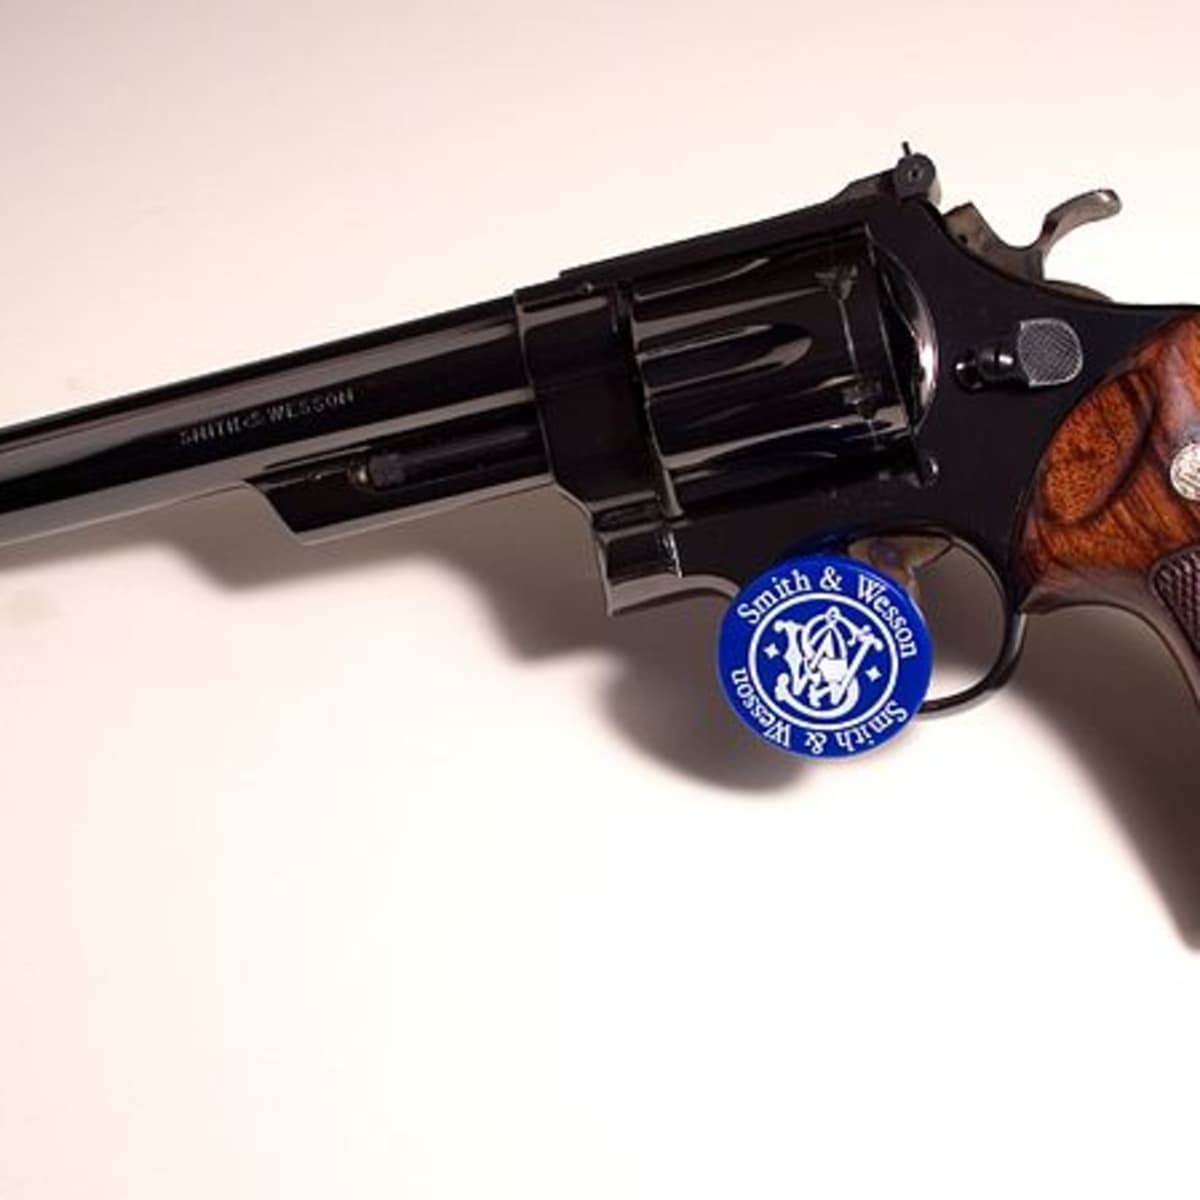 Is The 44 Magnum Good For Self Defense Surprise Hubpages